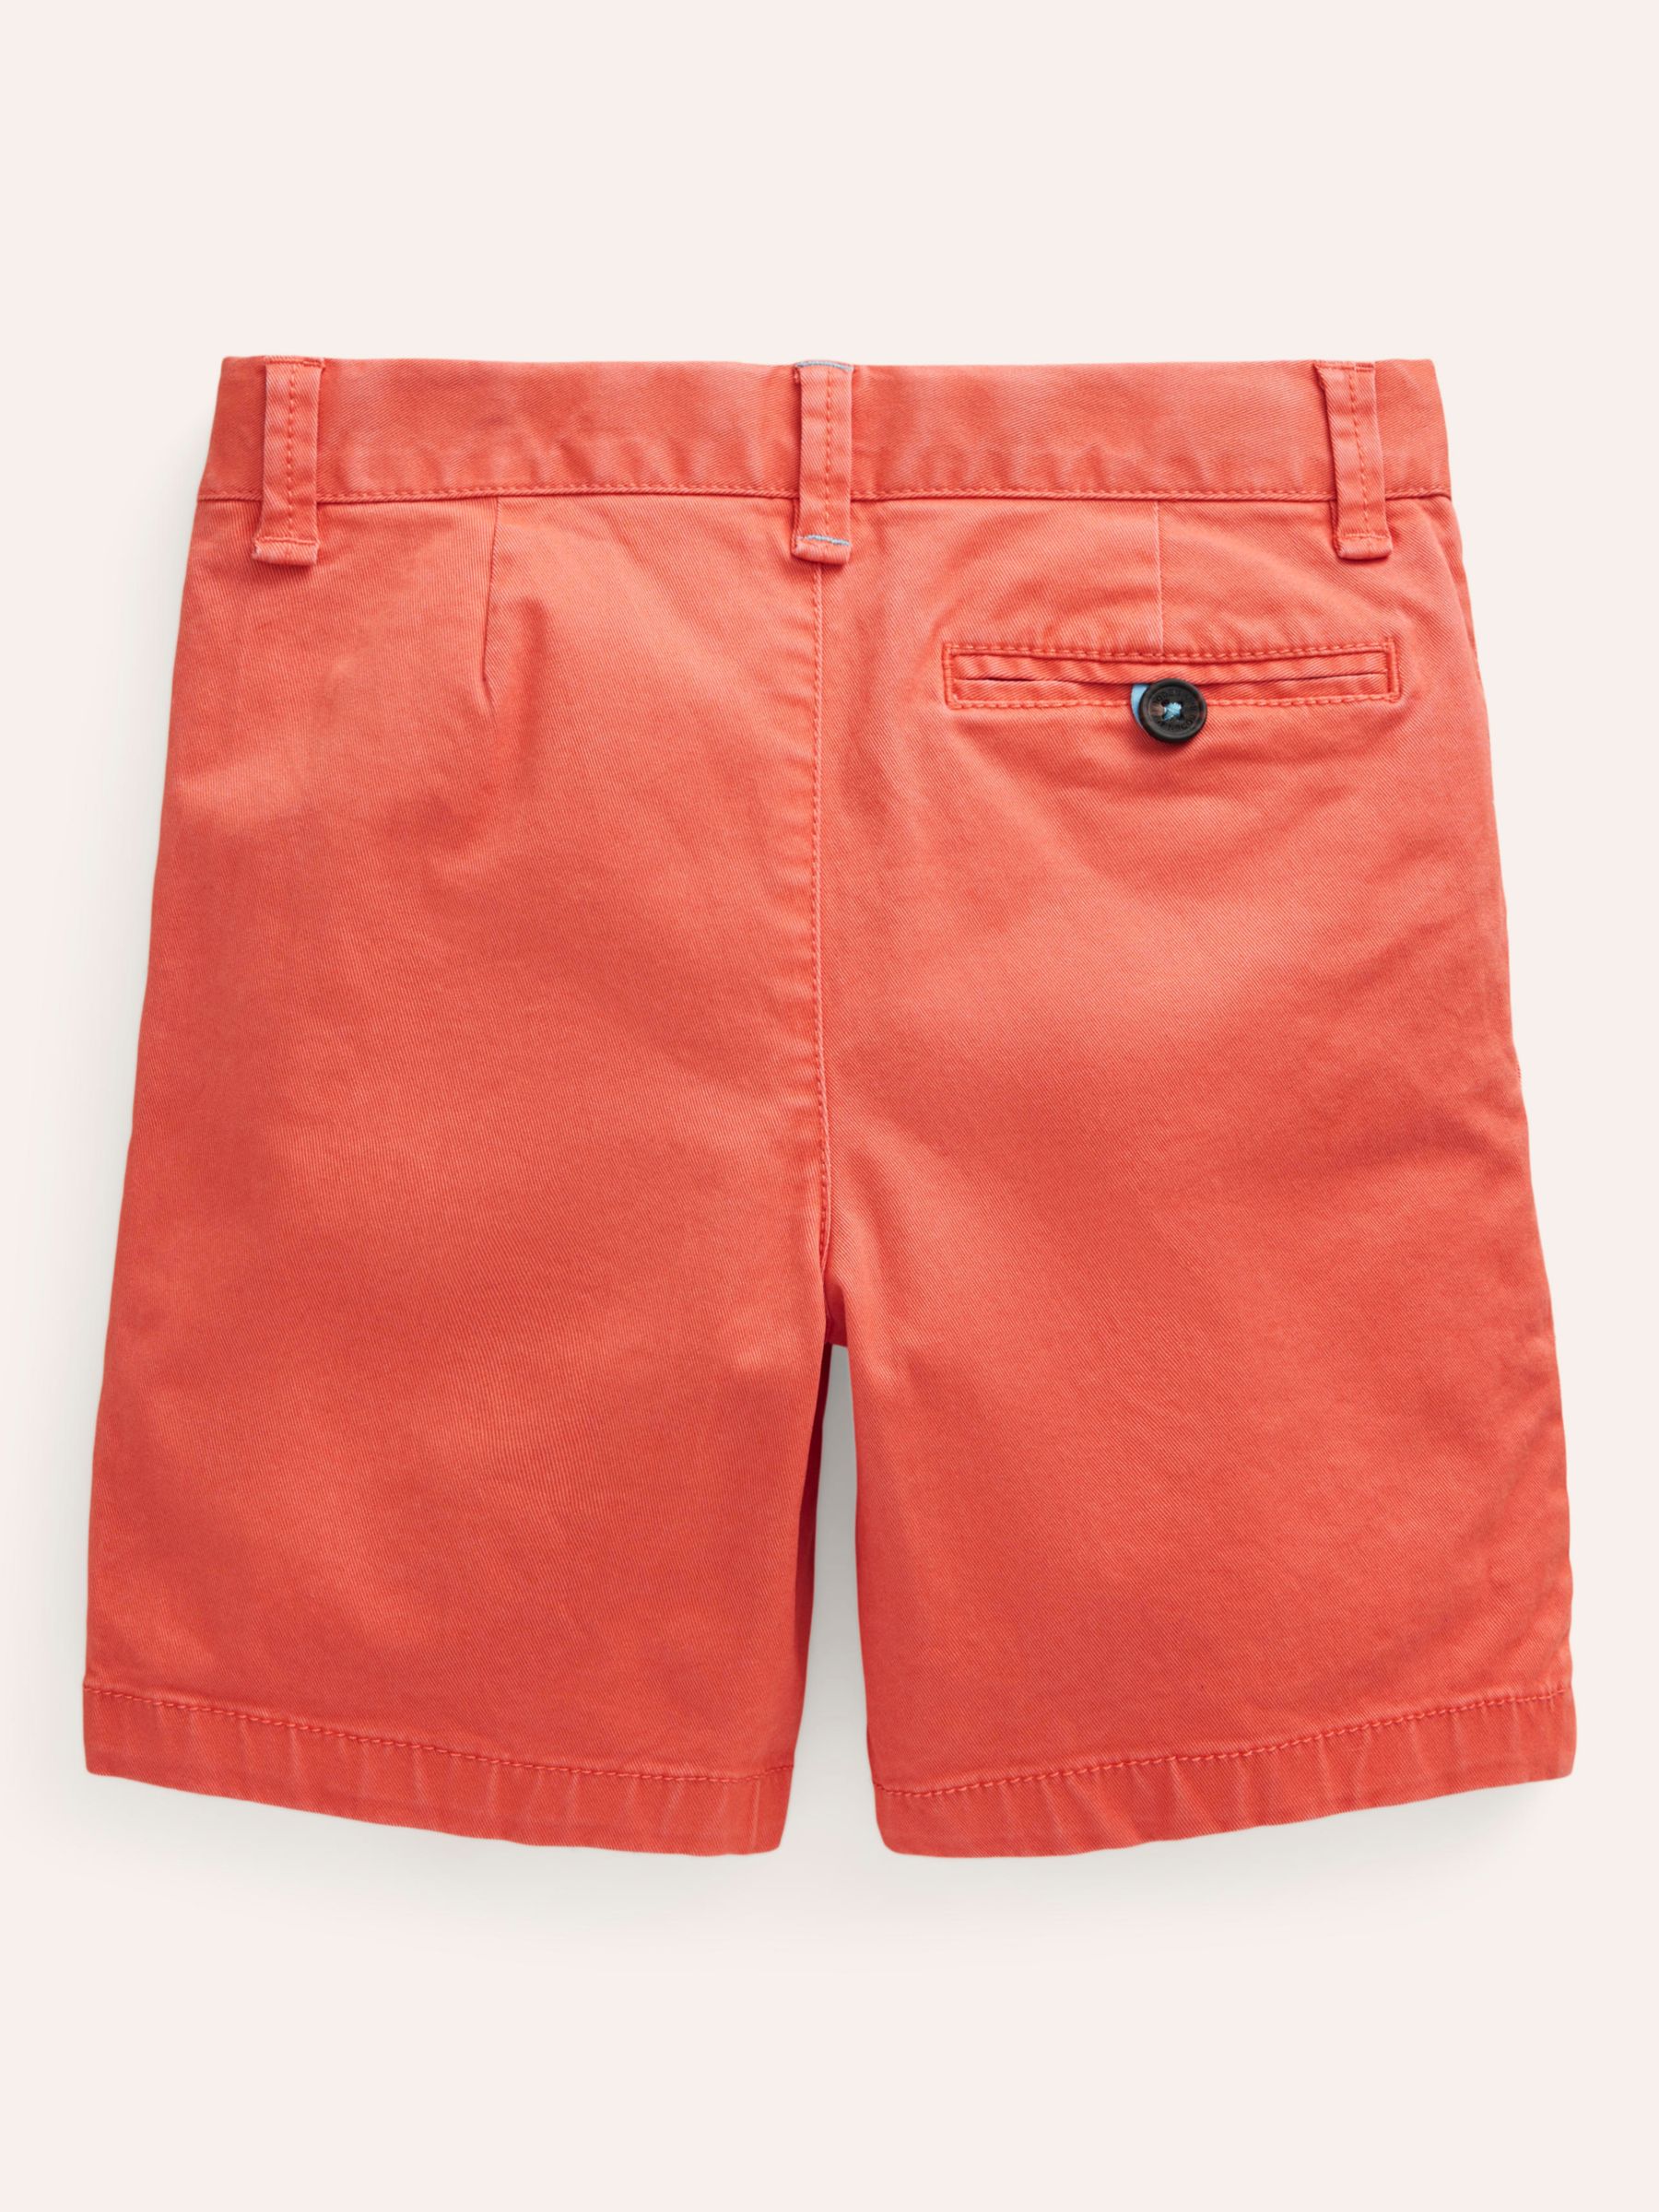 Buy Mini Boden Kids' Classic Chino Shorts Online at johnlewis.com